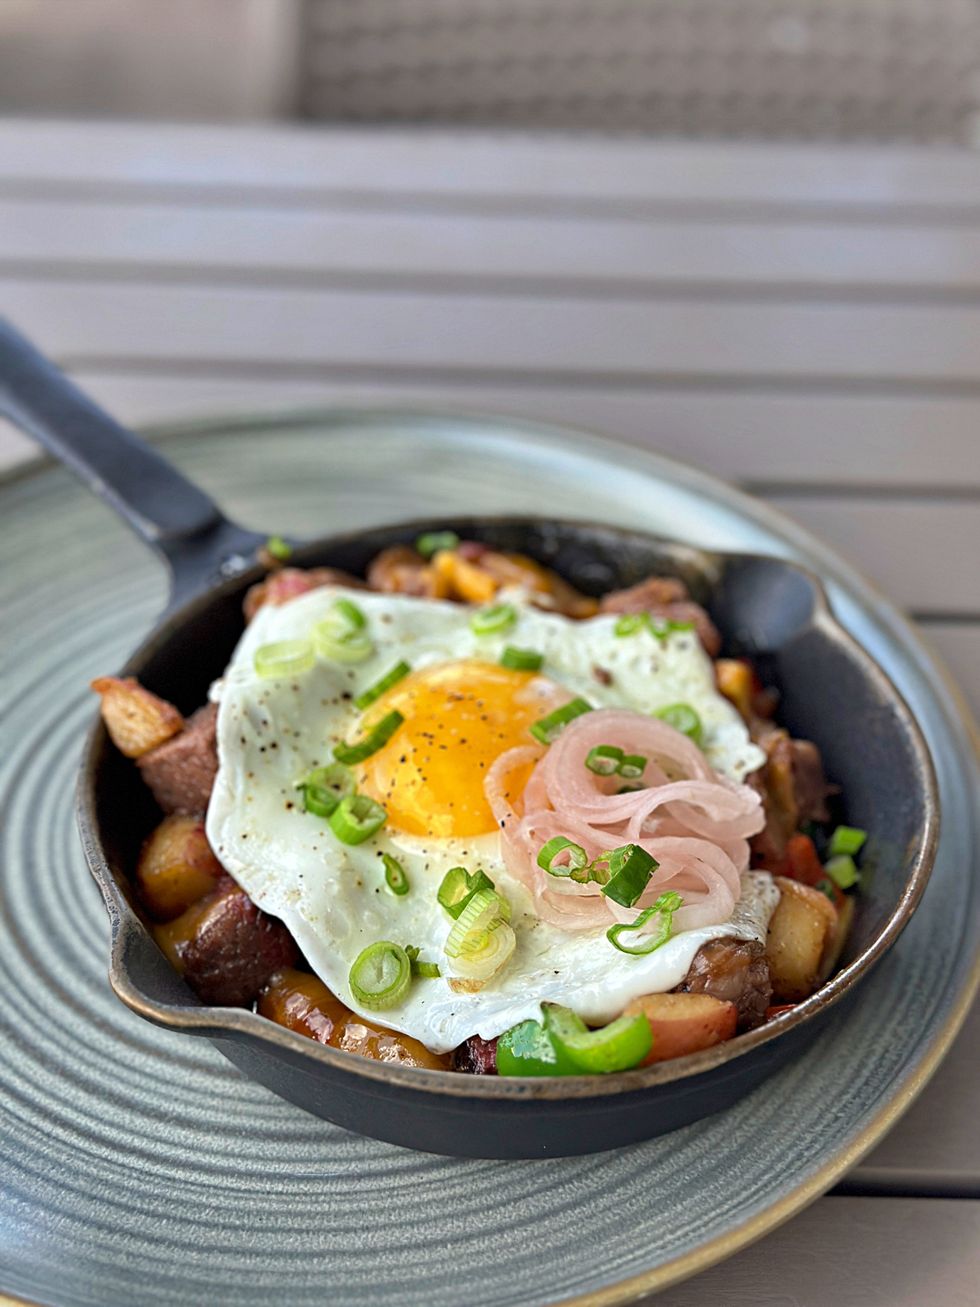 A skillet filled with potatoes, an over-easy egg, green onions, and a barbecue brisket.